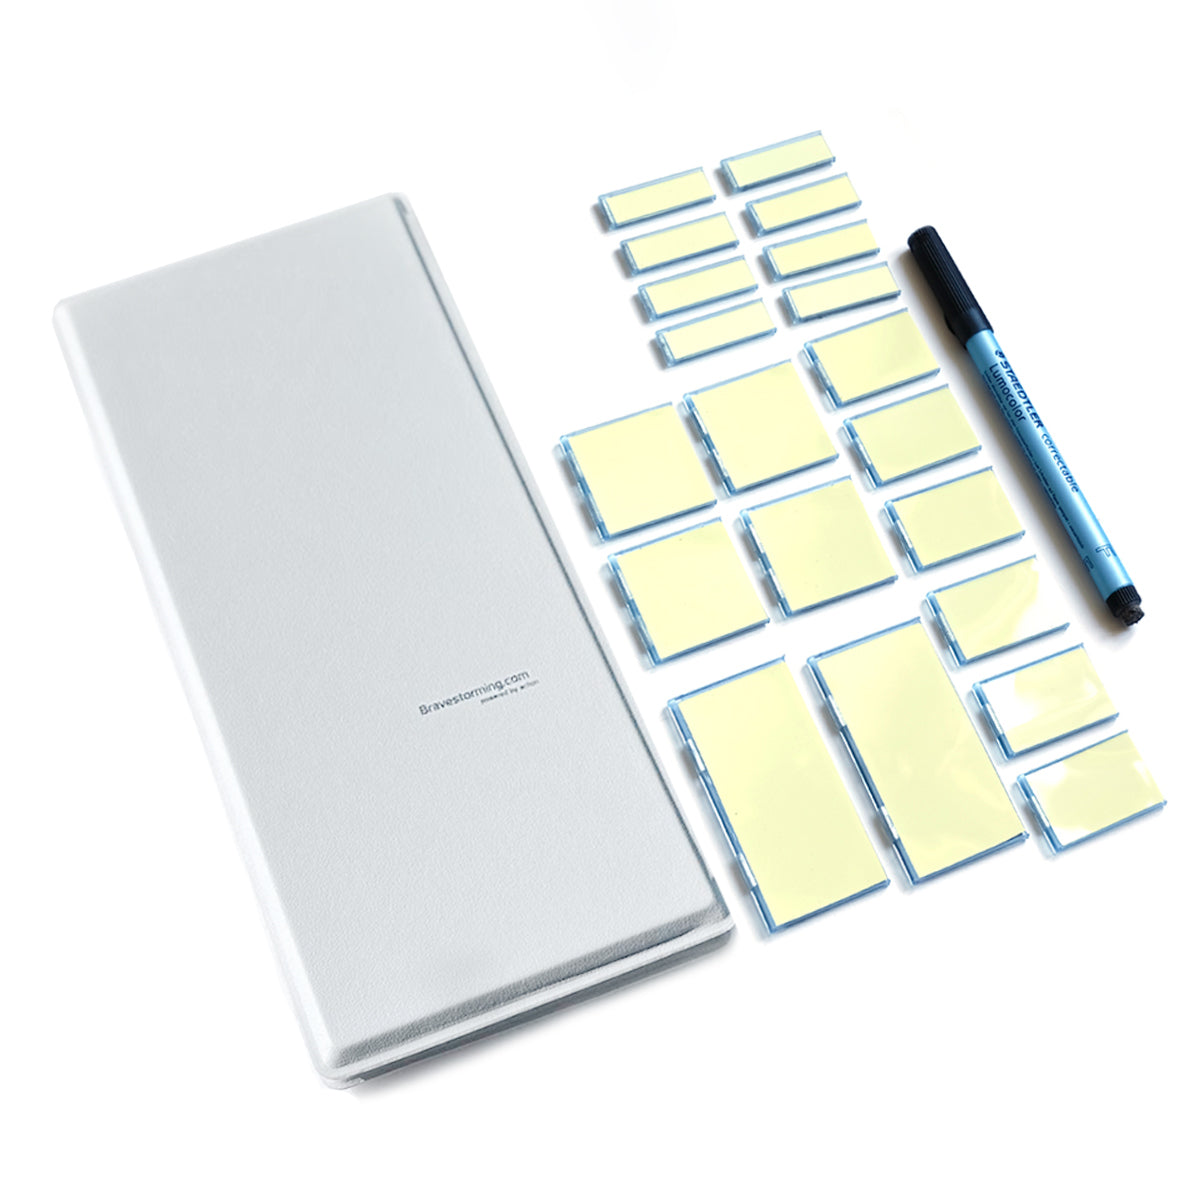 MoverPad + Mover Erase Combo Bundle